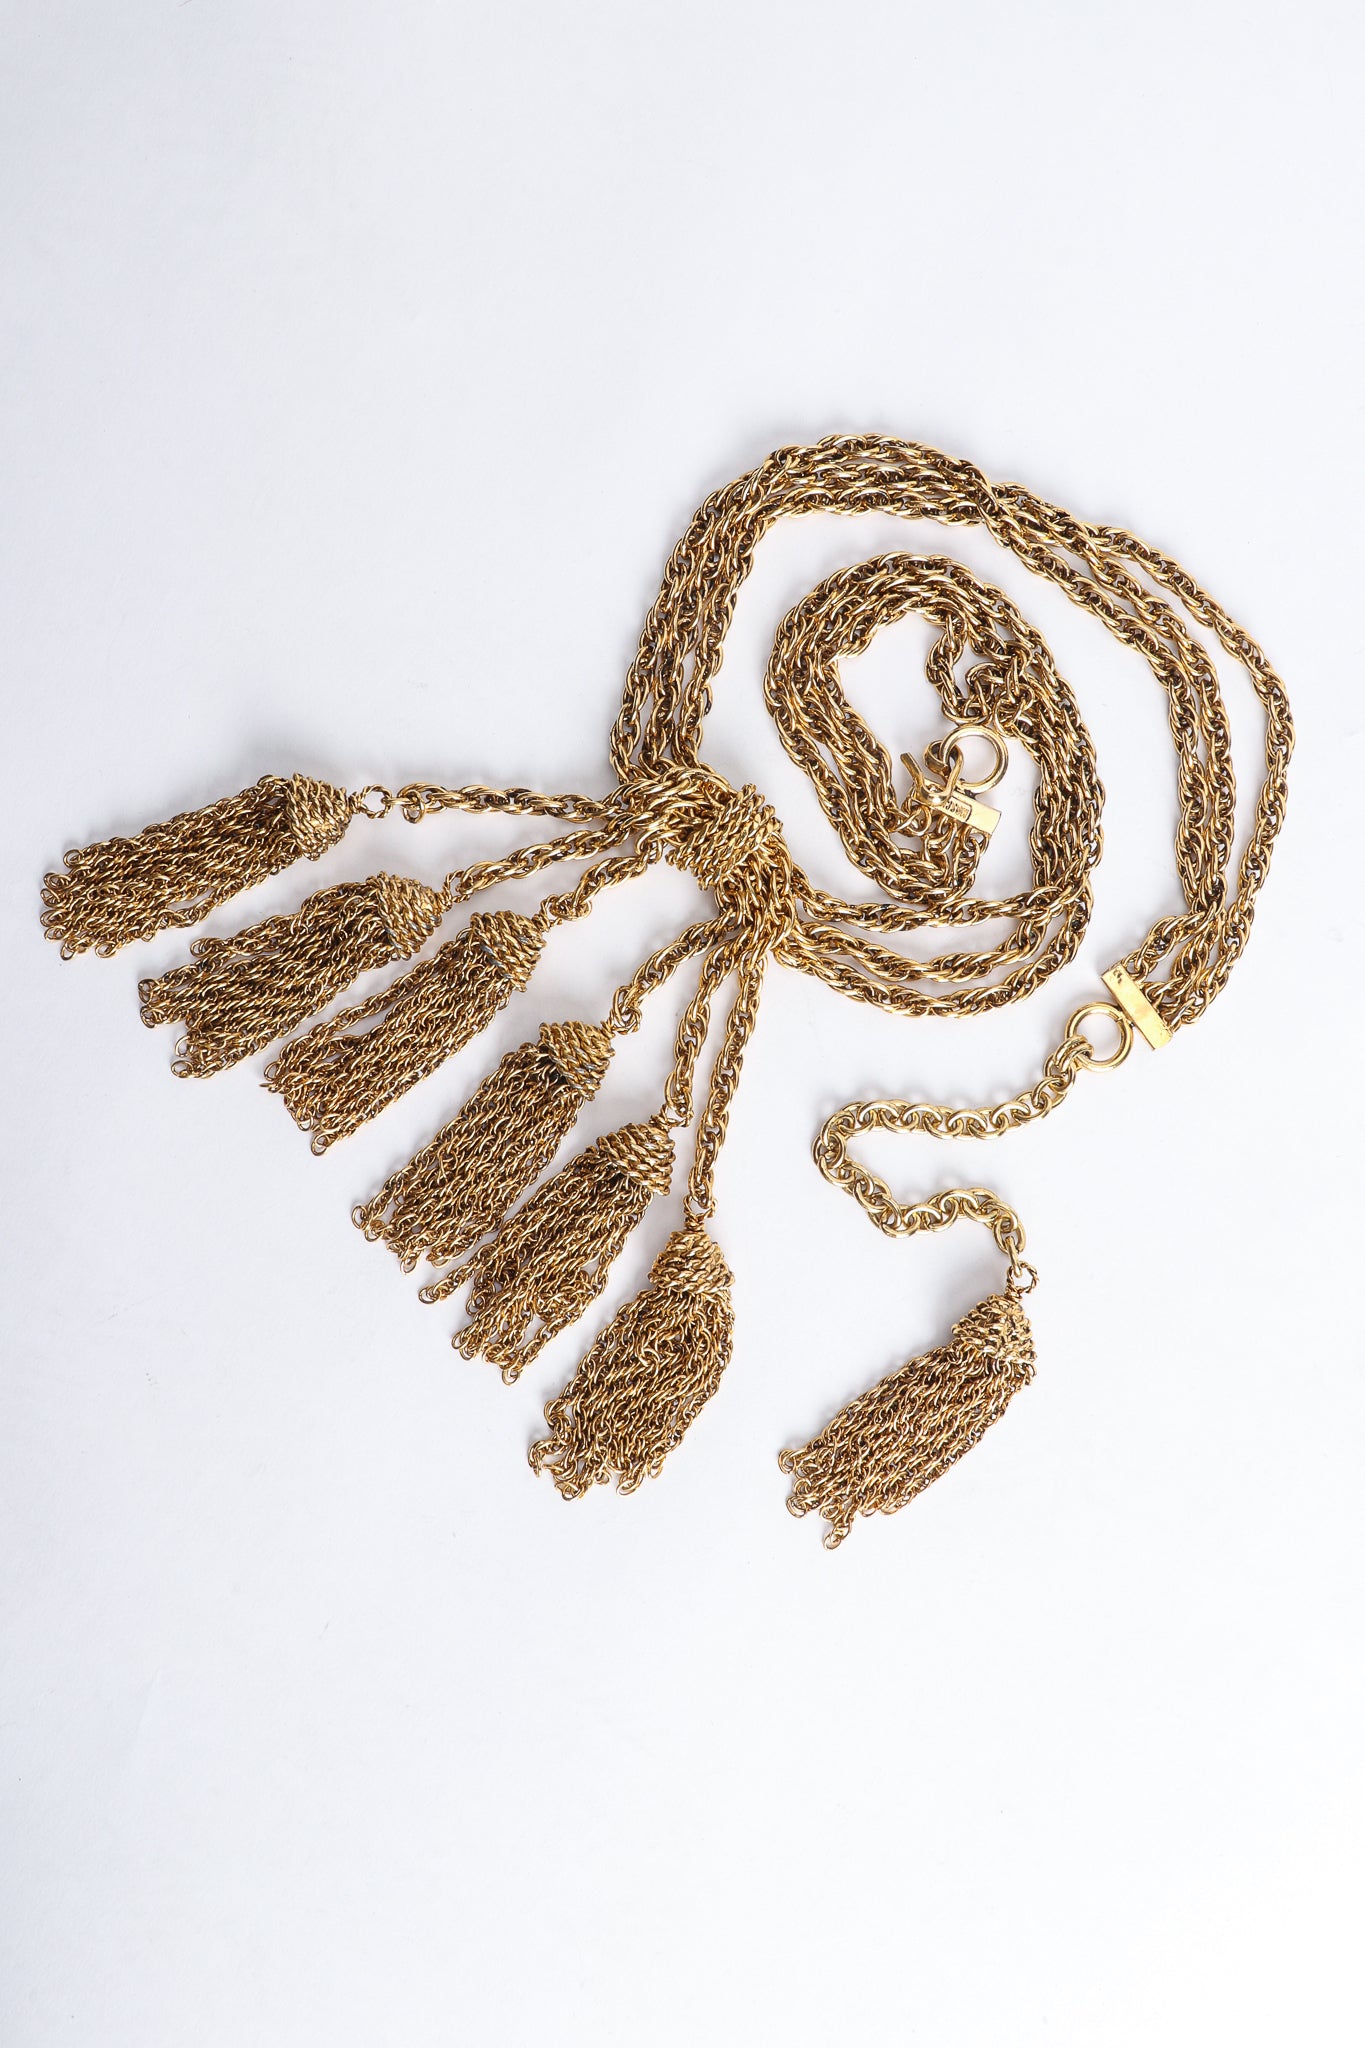  Vintage Moschino Gold Tassel Chain Belt Necklace at Recess Los Angeles